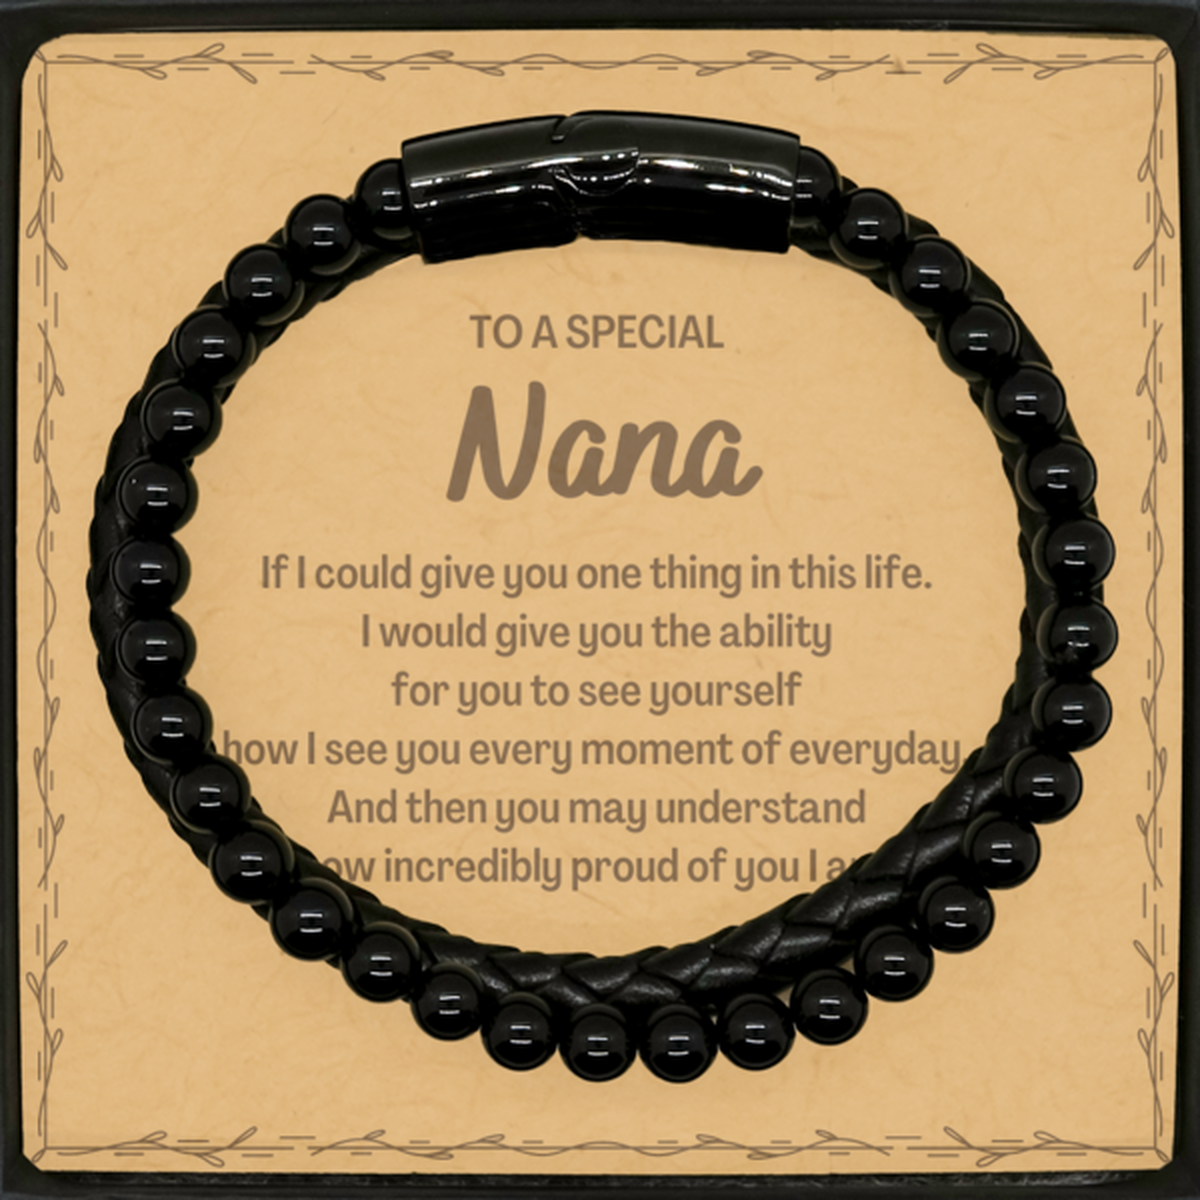 To My Nana Stone Leather Bracelets, Gifts For Nana Message Card, Inspirational Gifts for Christmas Birthday, Epic Gifts for Nana To A Special Nana how incredibly proud of you I am